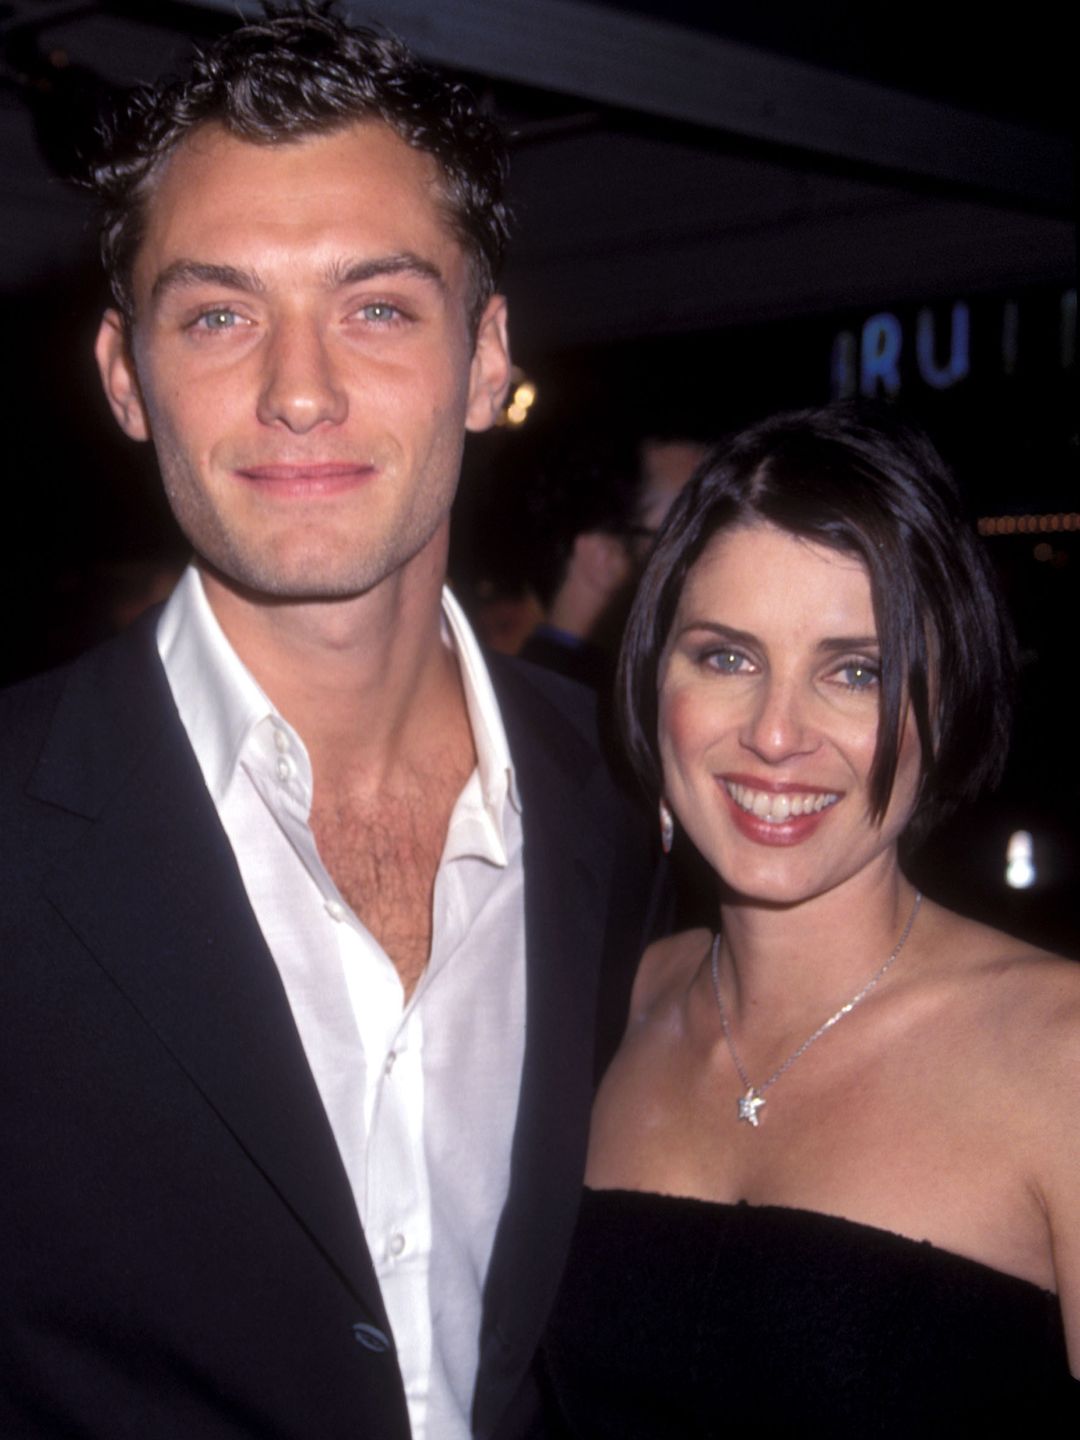 Jude and his first wife Sadie Frost smiling at the camera